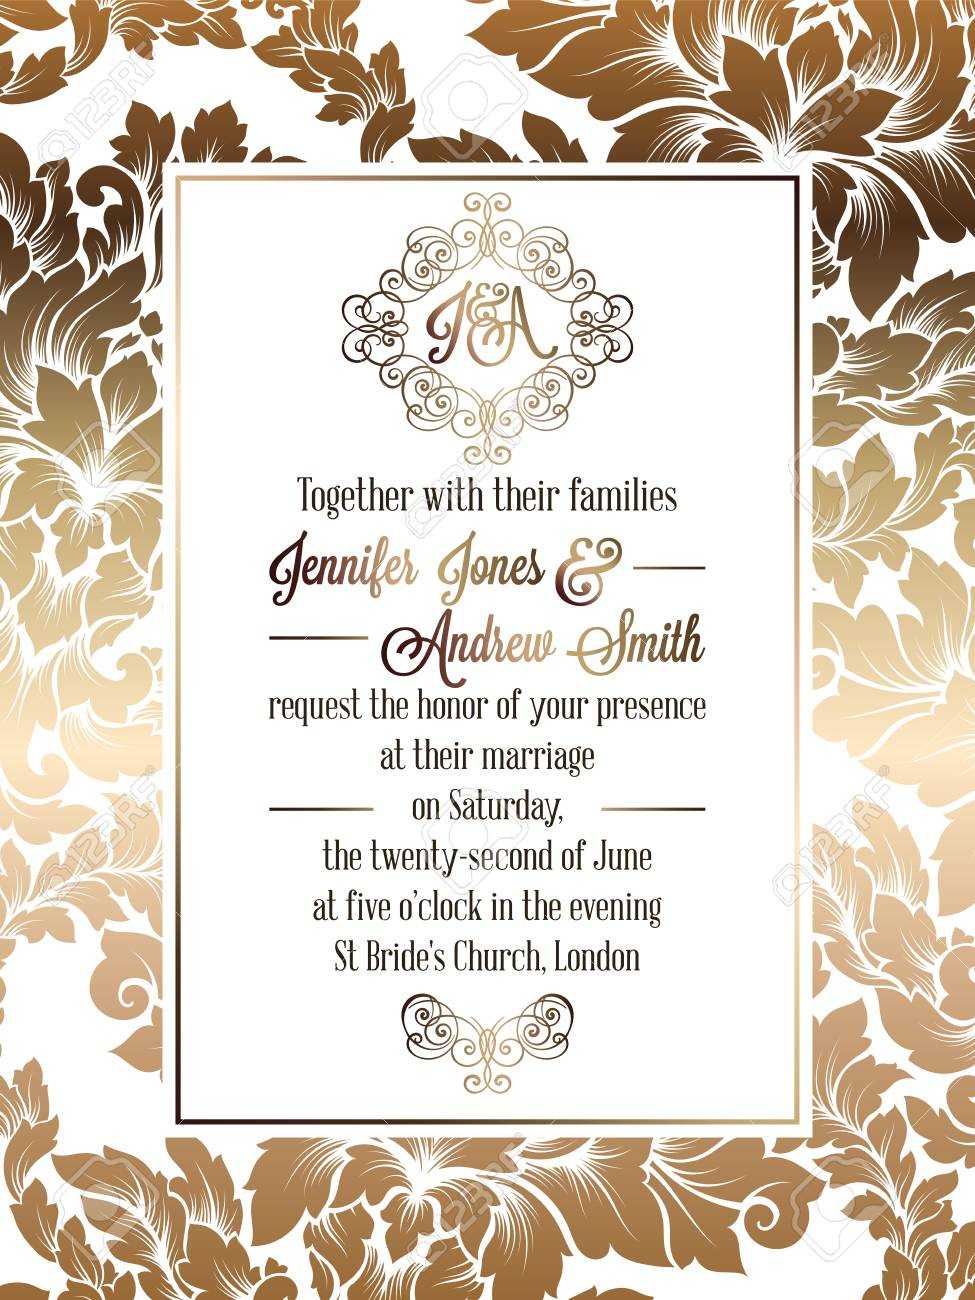 Vintage Baroque Style Wedding Invitation Card Template.. Elegant.. Intended For Invitation Cards Templates For Marriage